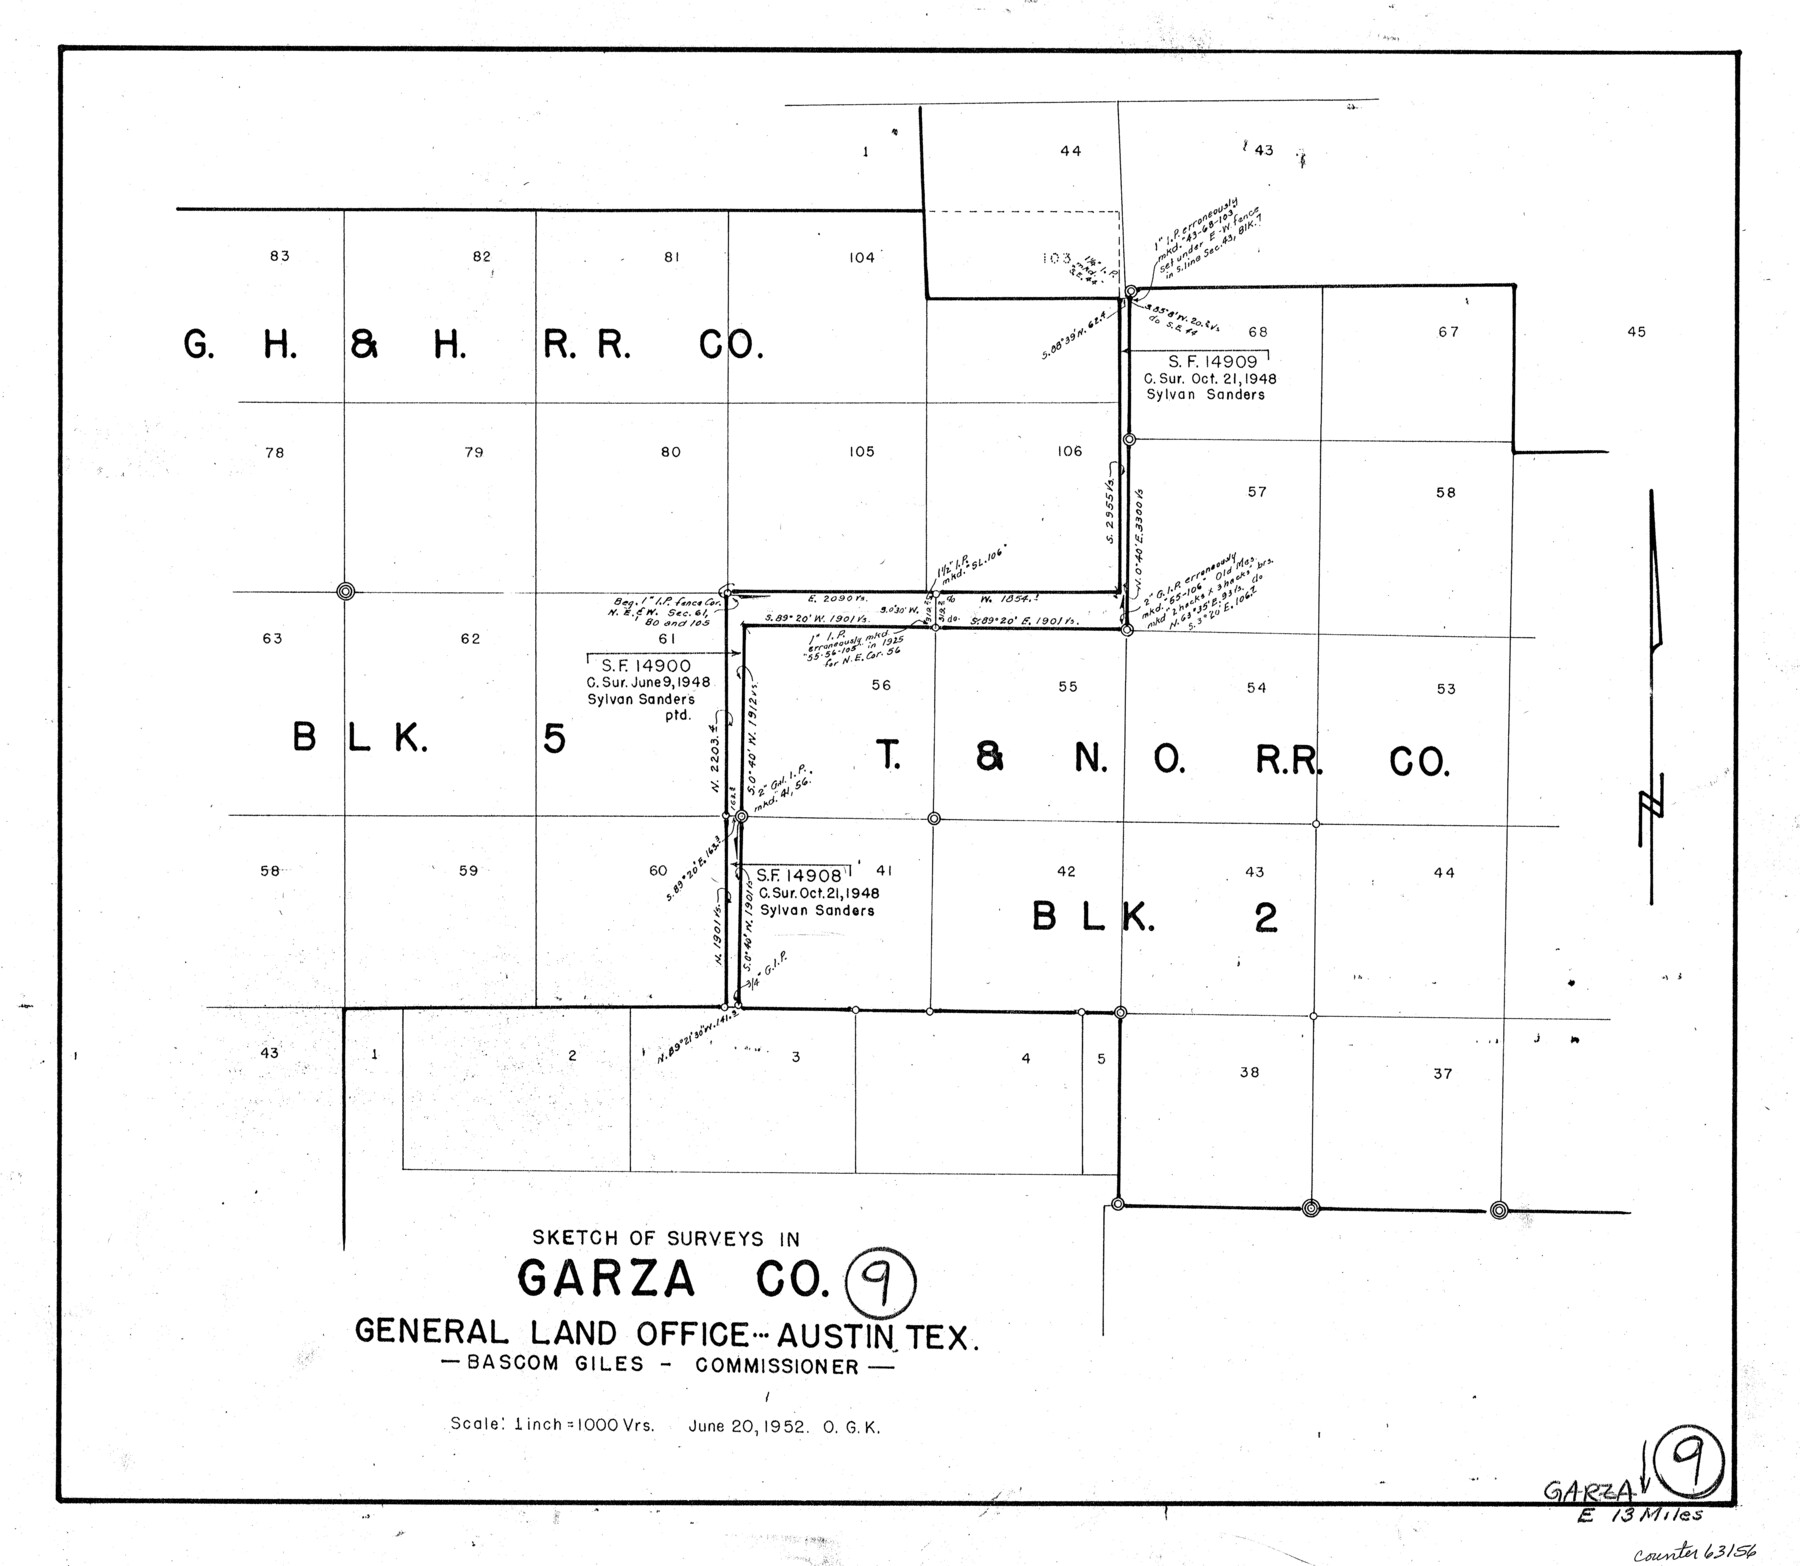 63156, Garza County Working Sketch 9, General Map Collection